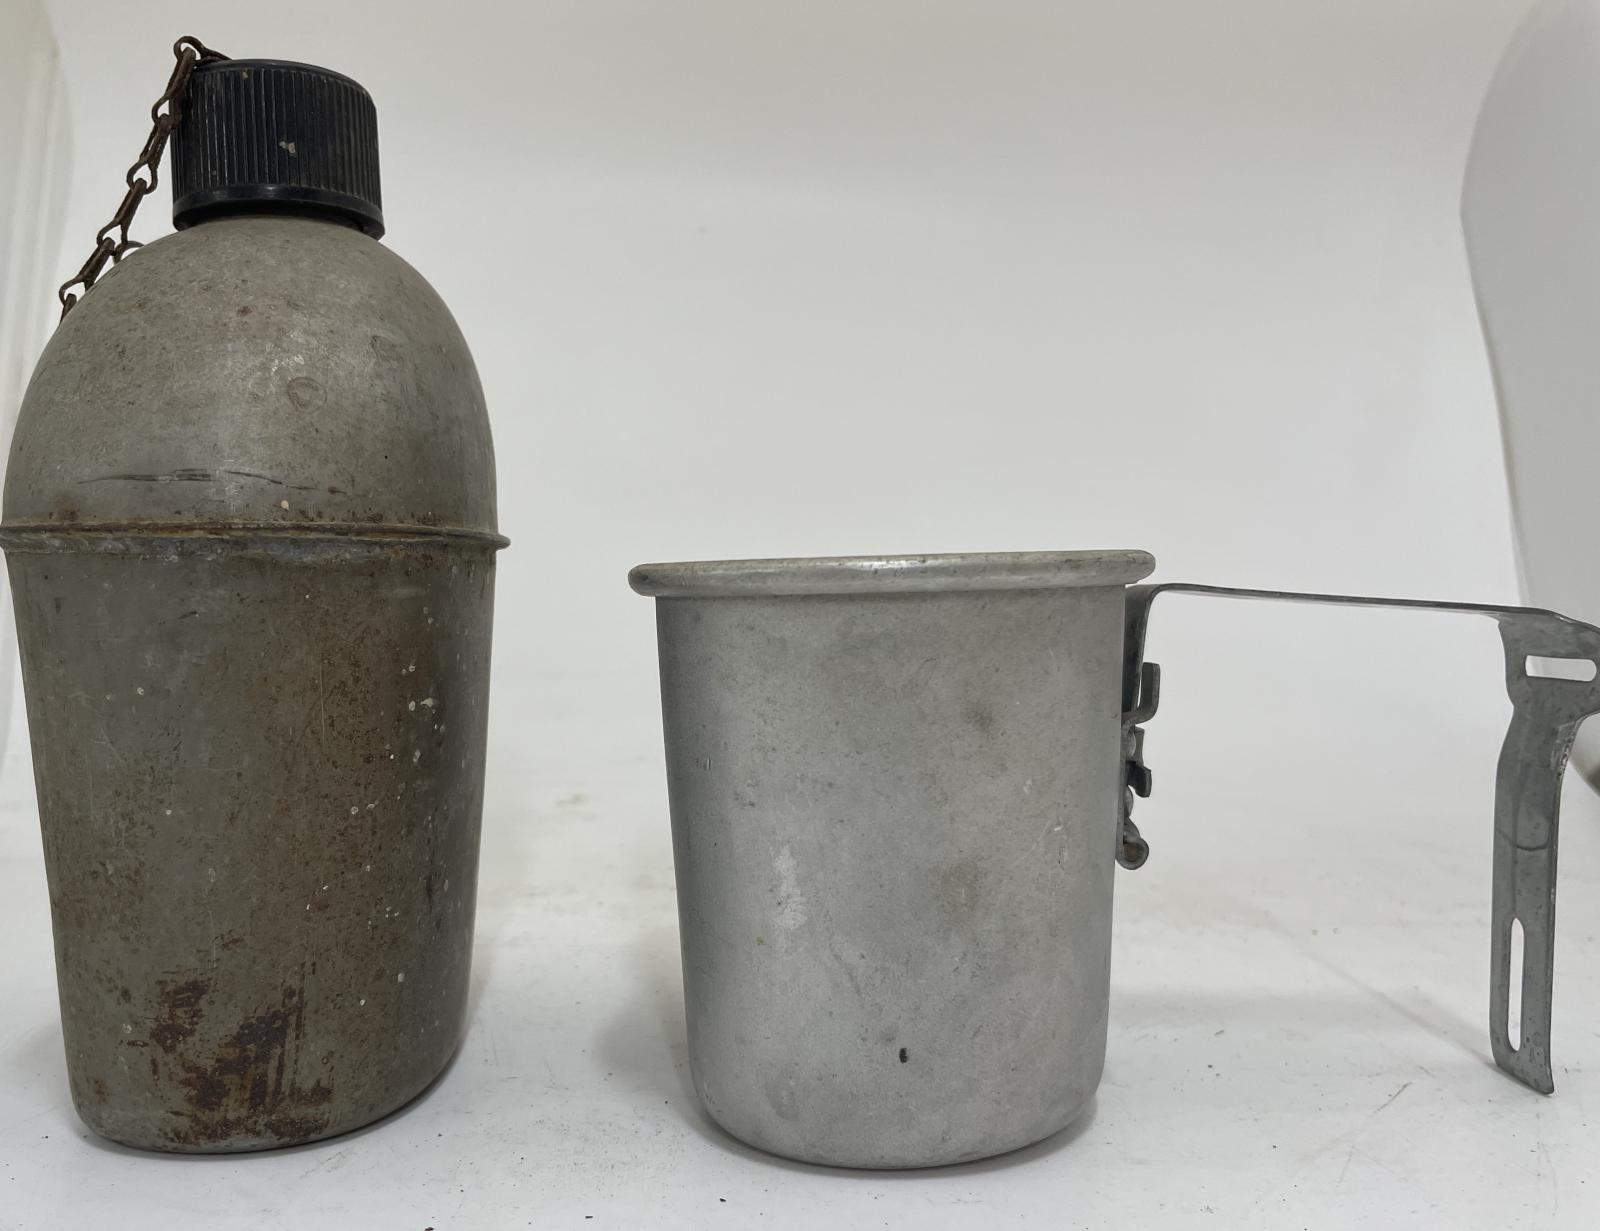 WW2 water bottle and cup